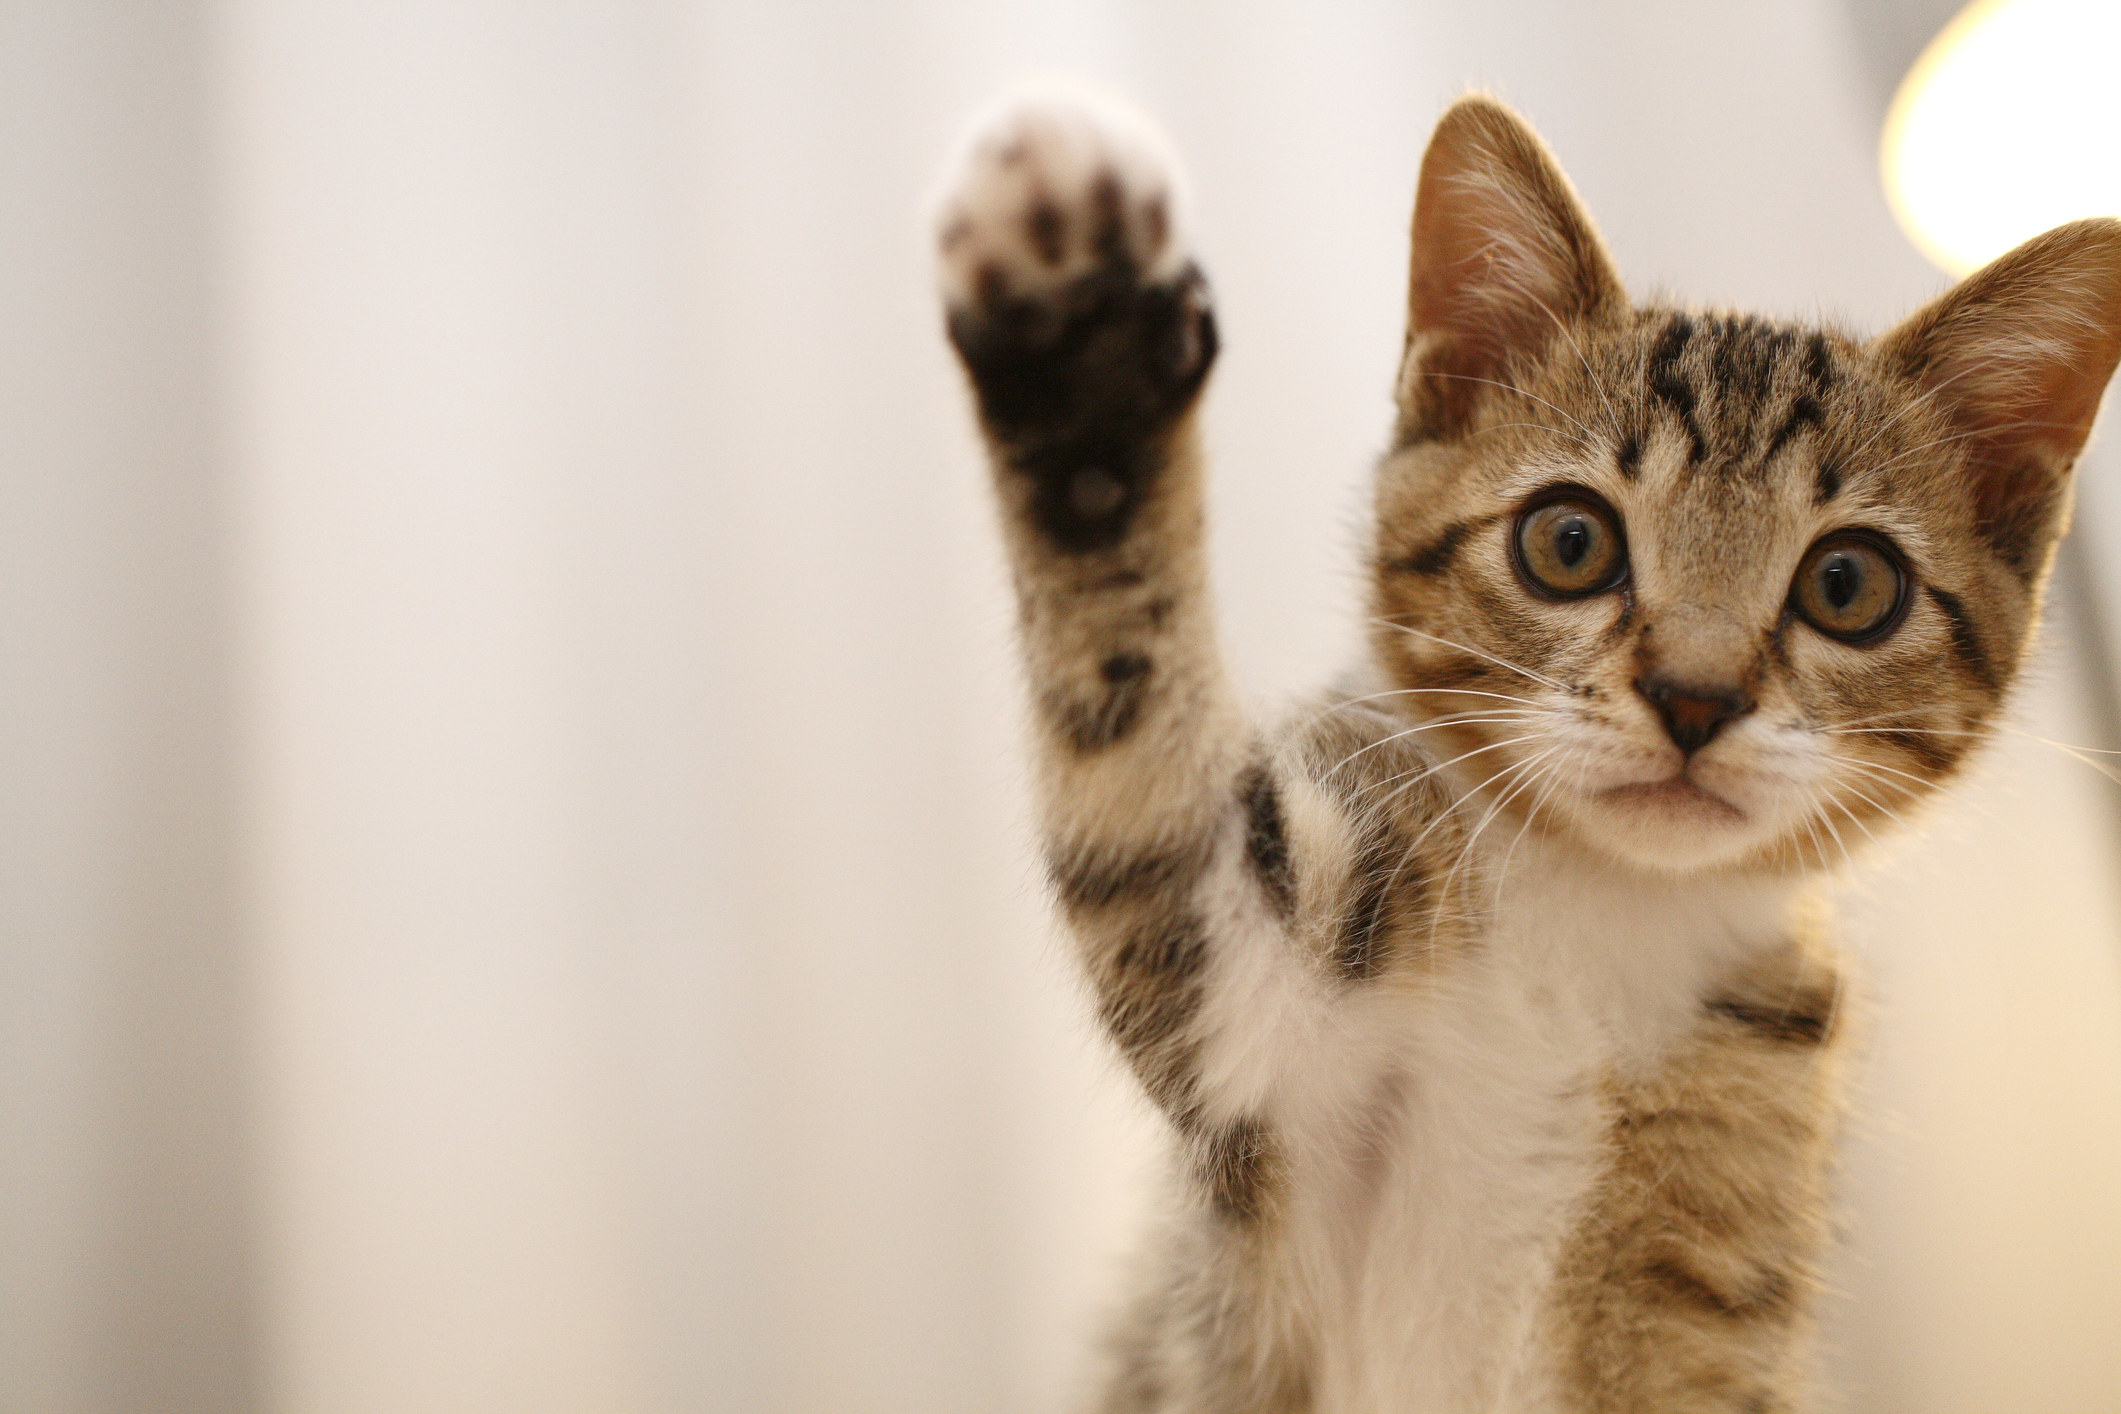 A cat with its paw in the air